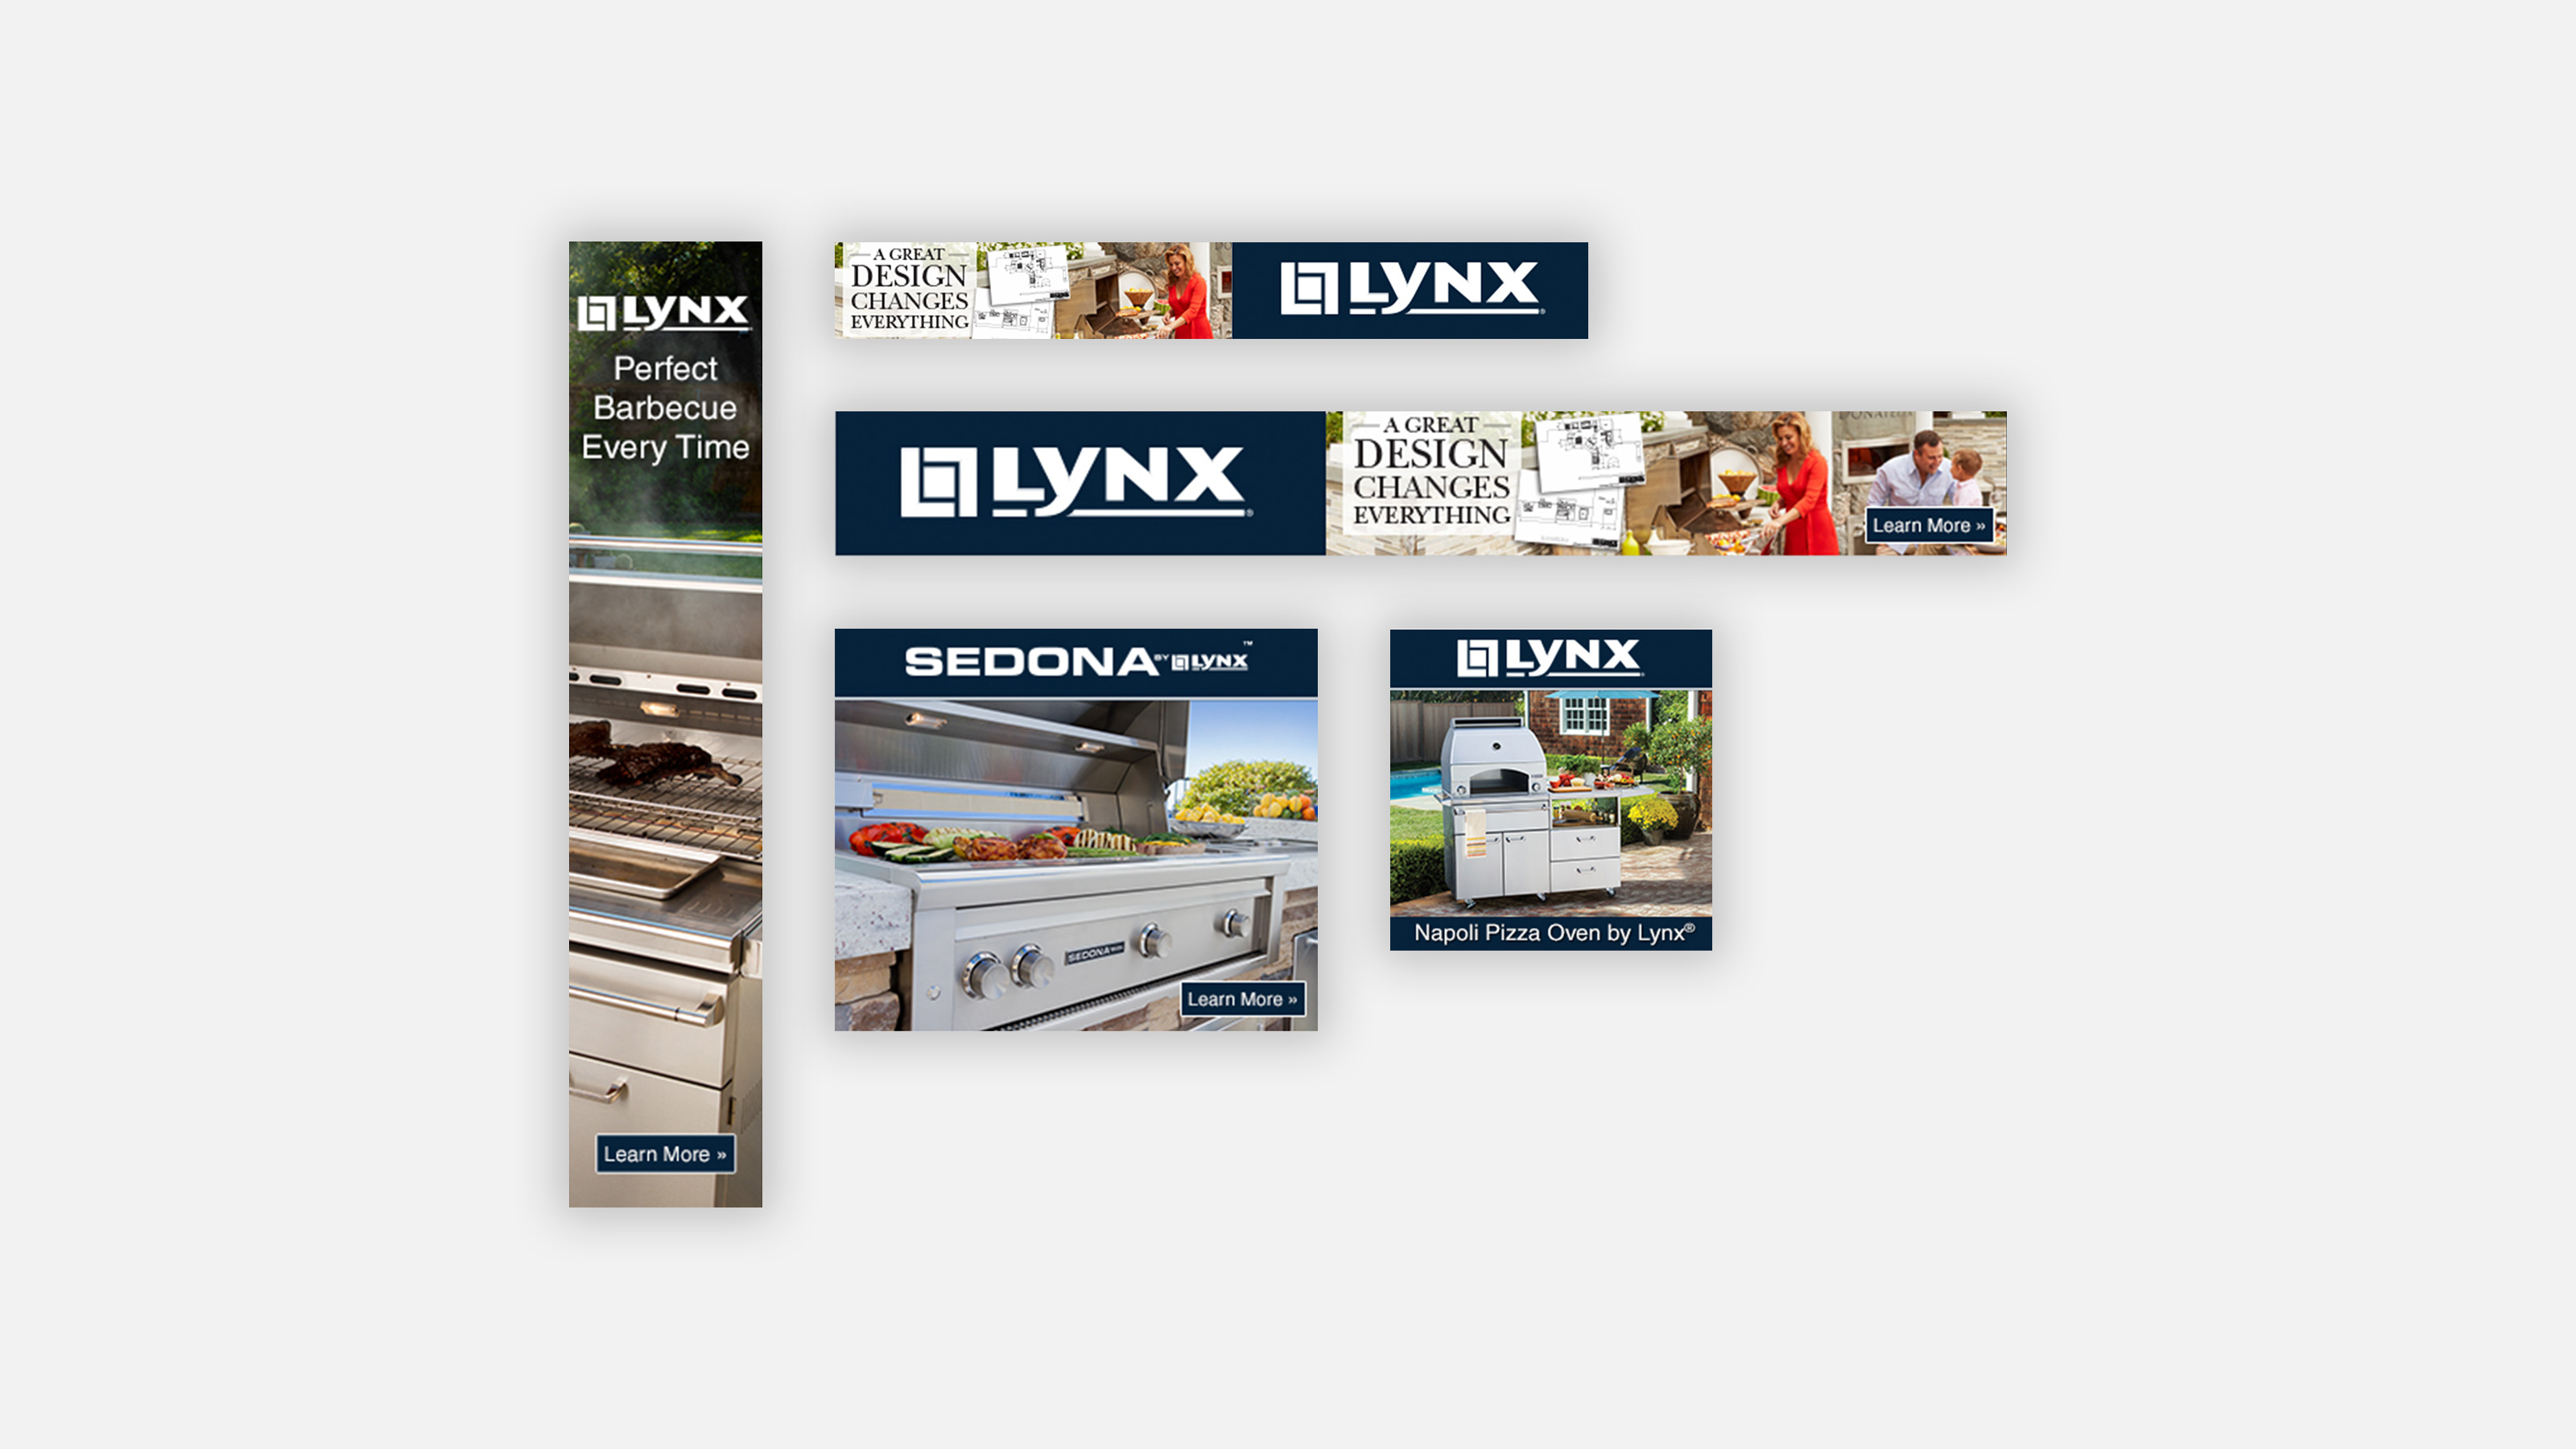 LYNX paid ad examples